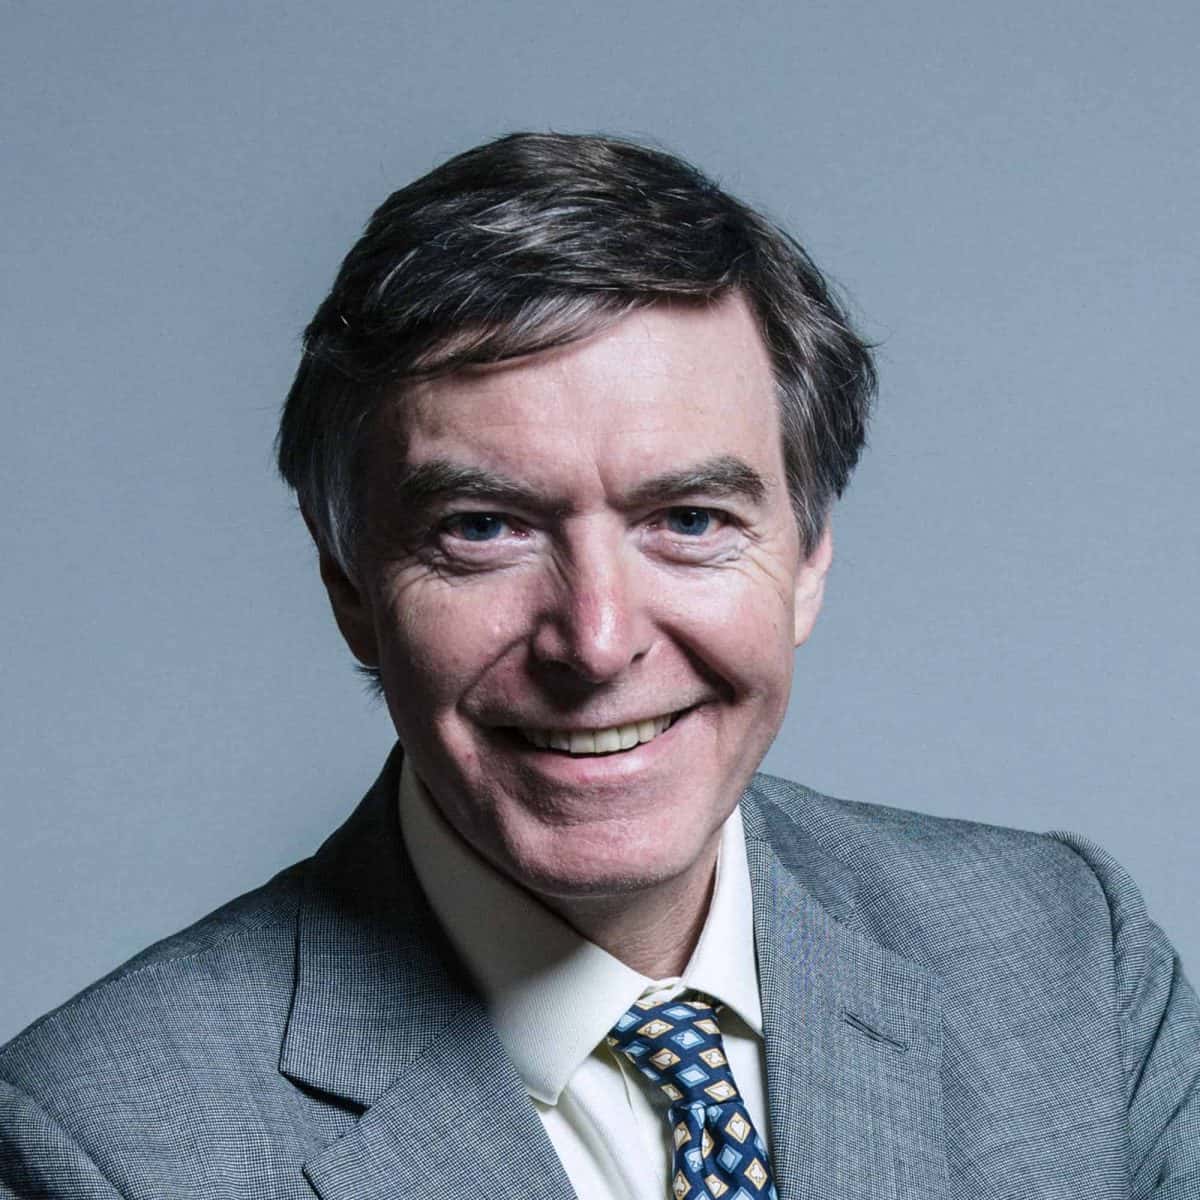 Philip Dunne : UK Parliament official